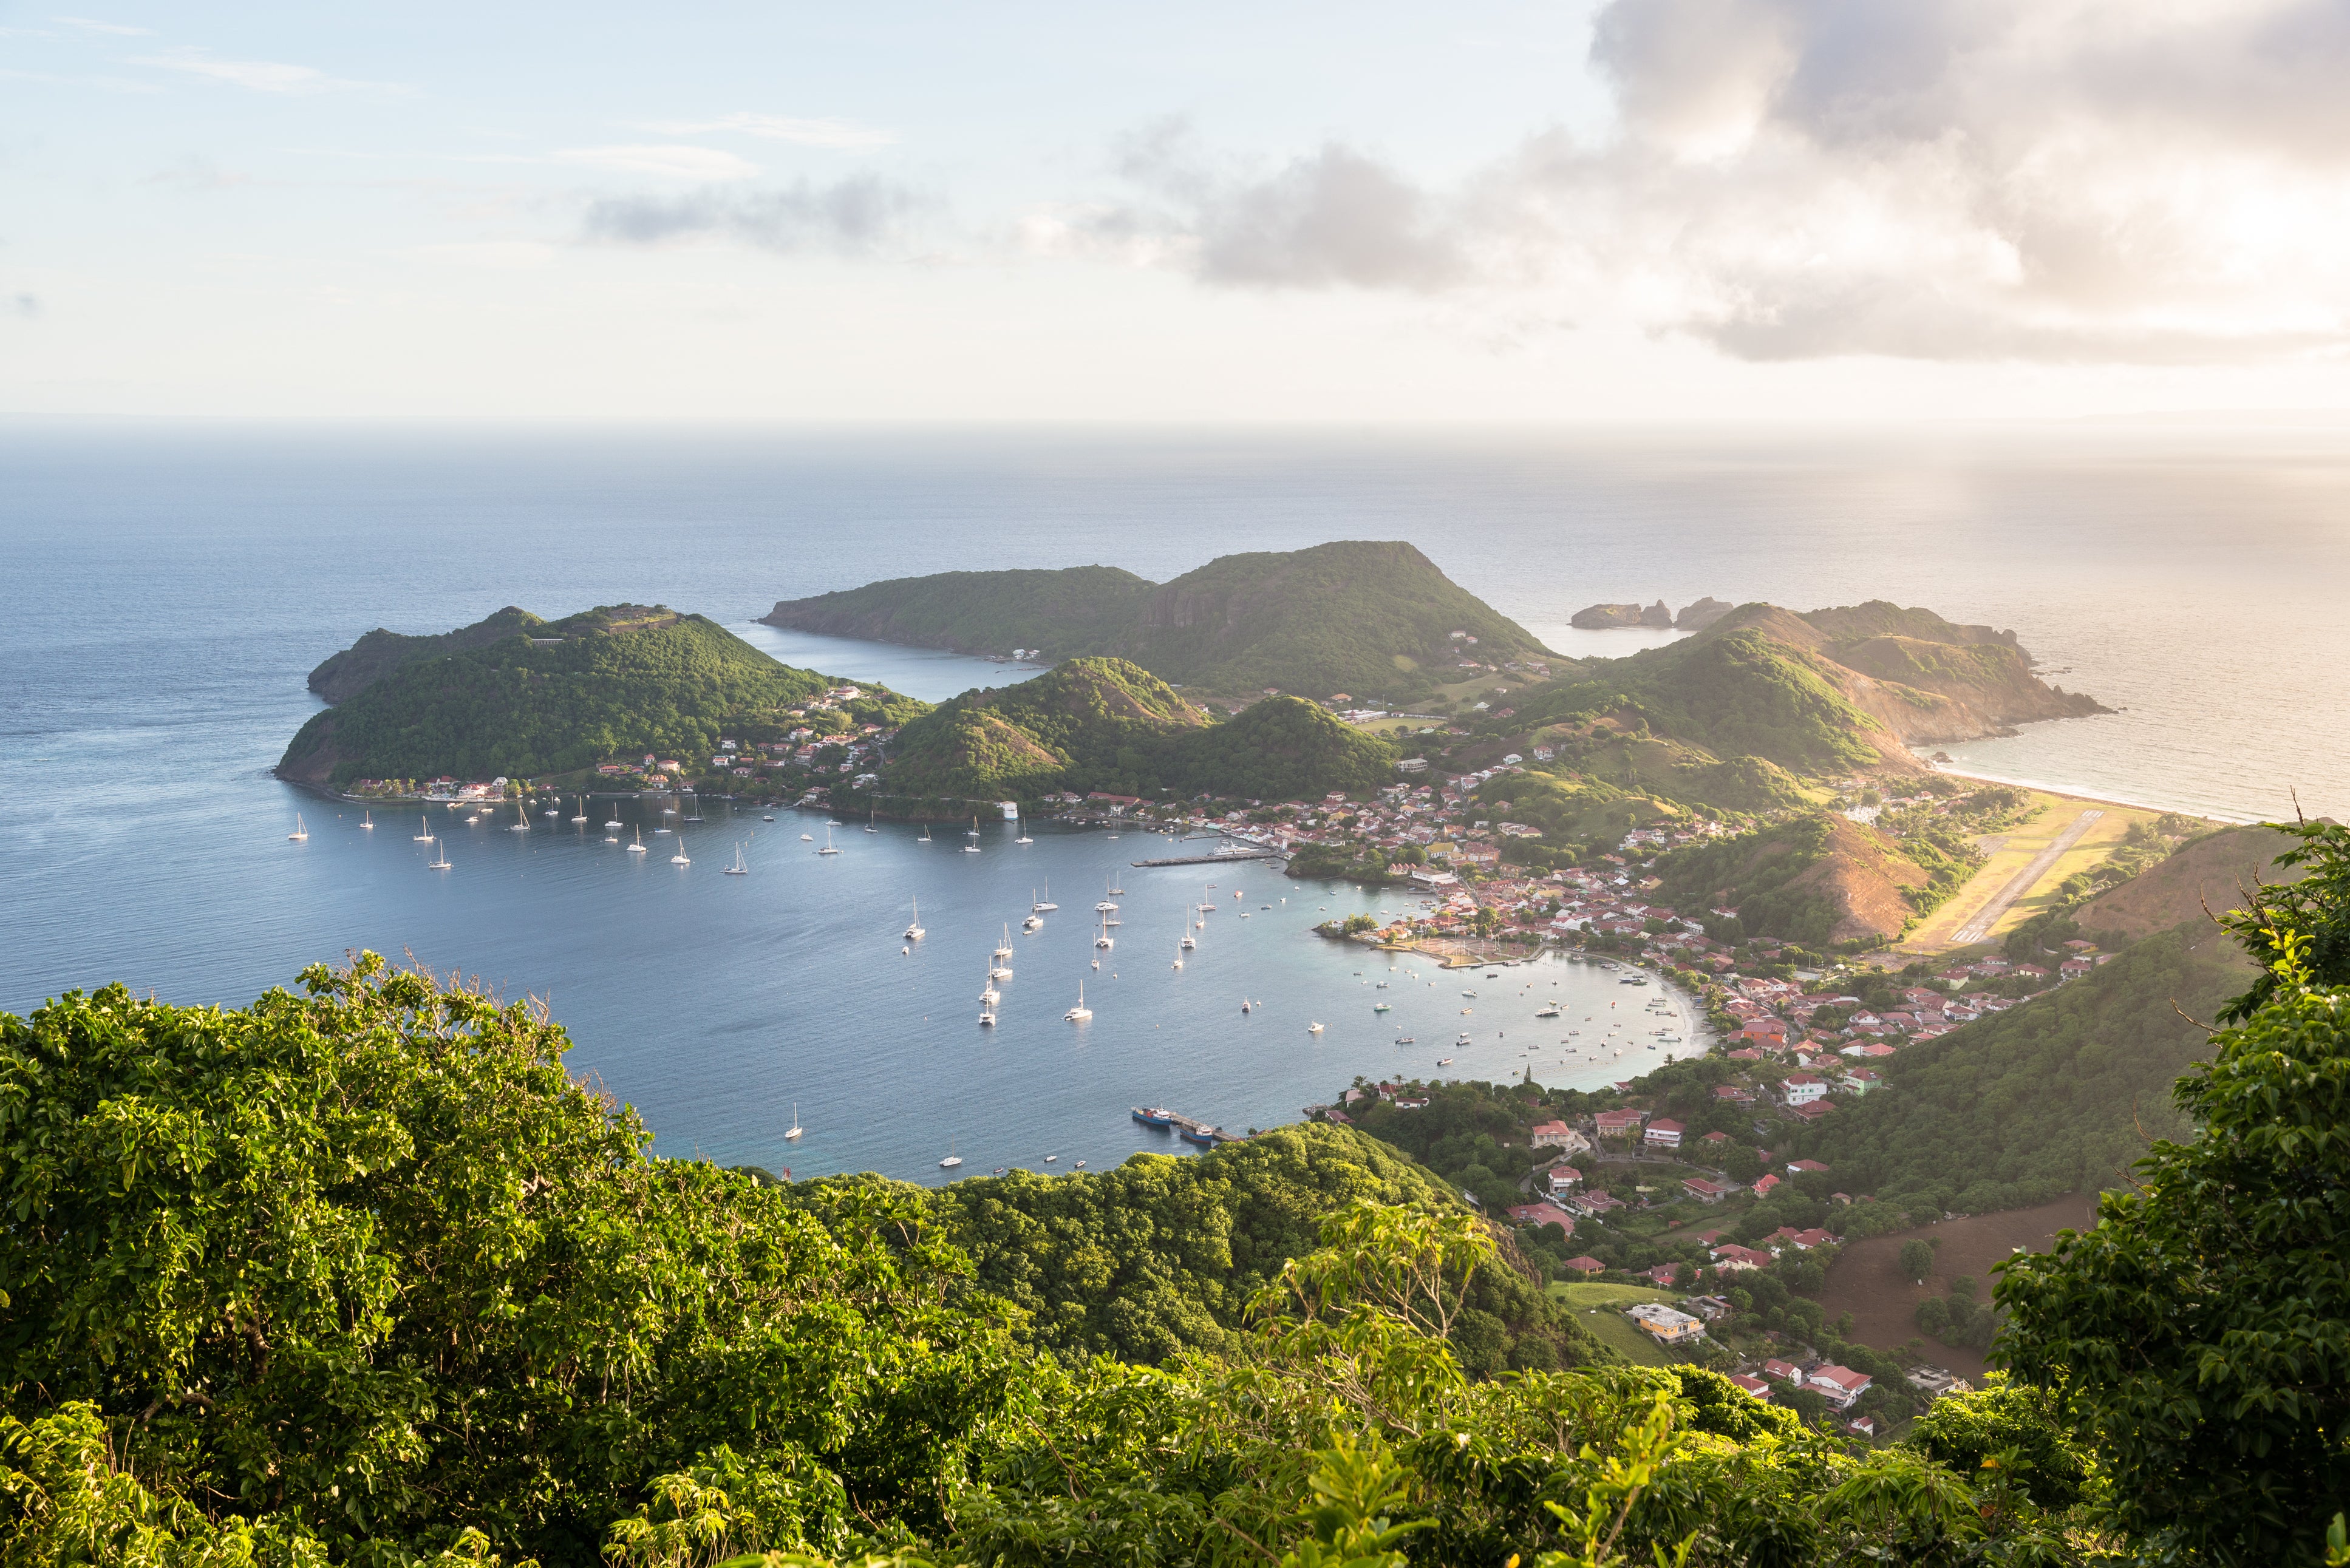 Basse-Terre and Terre-de-Haut set the scene for Death in Paradise